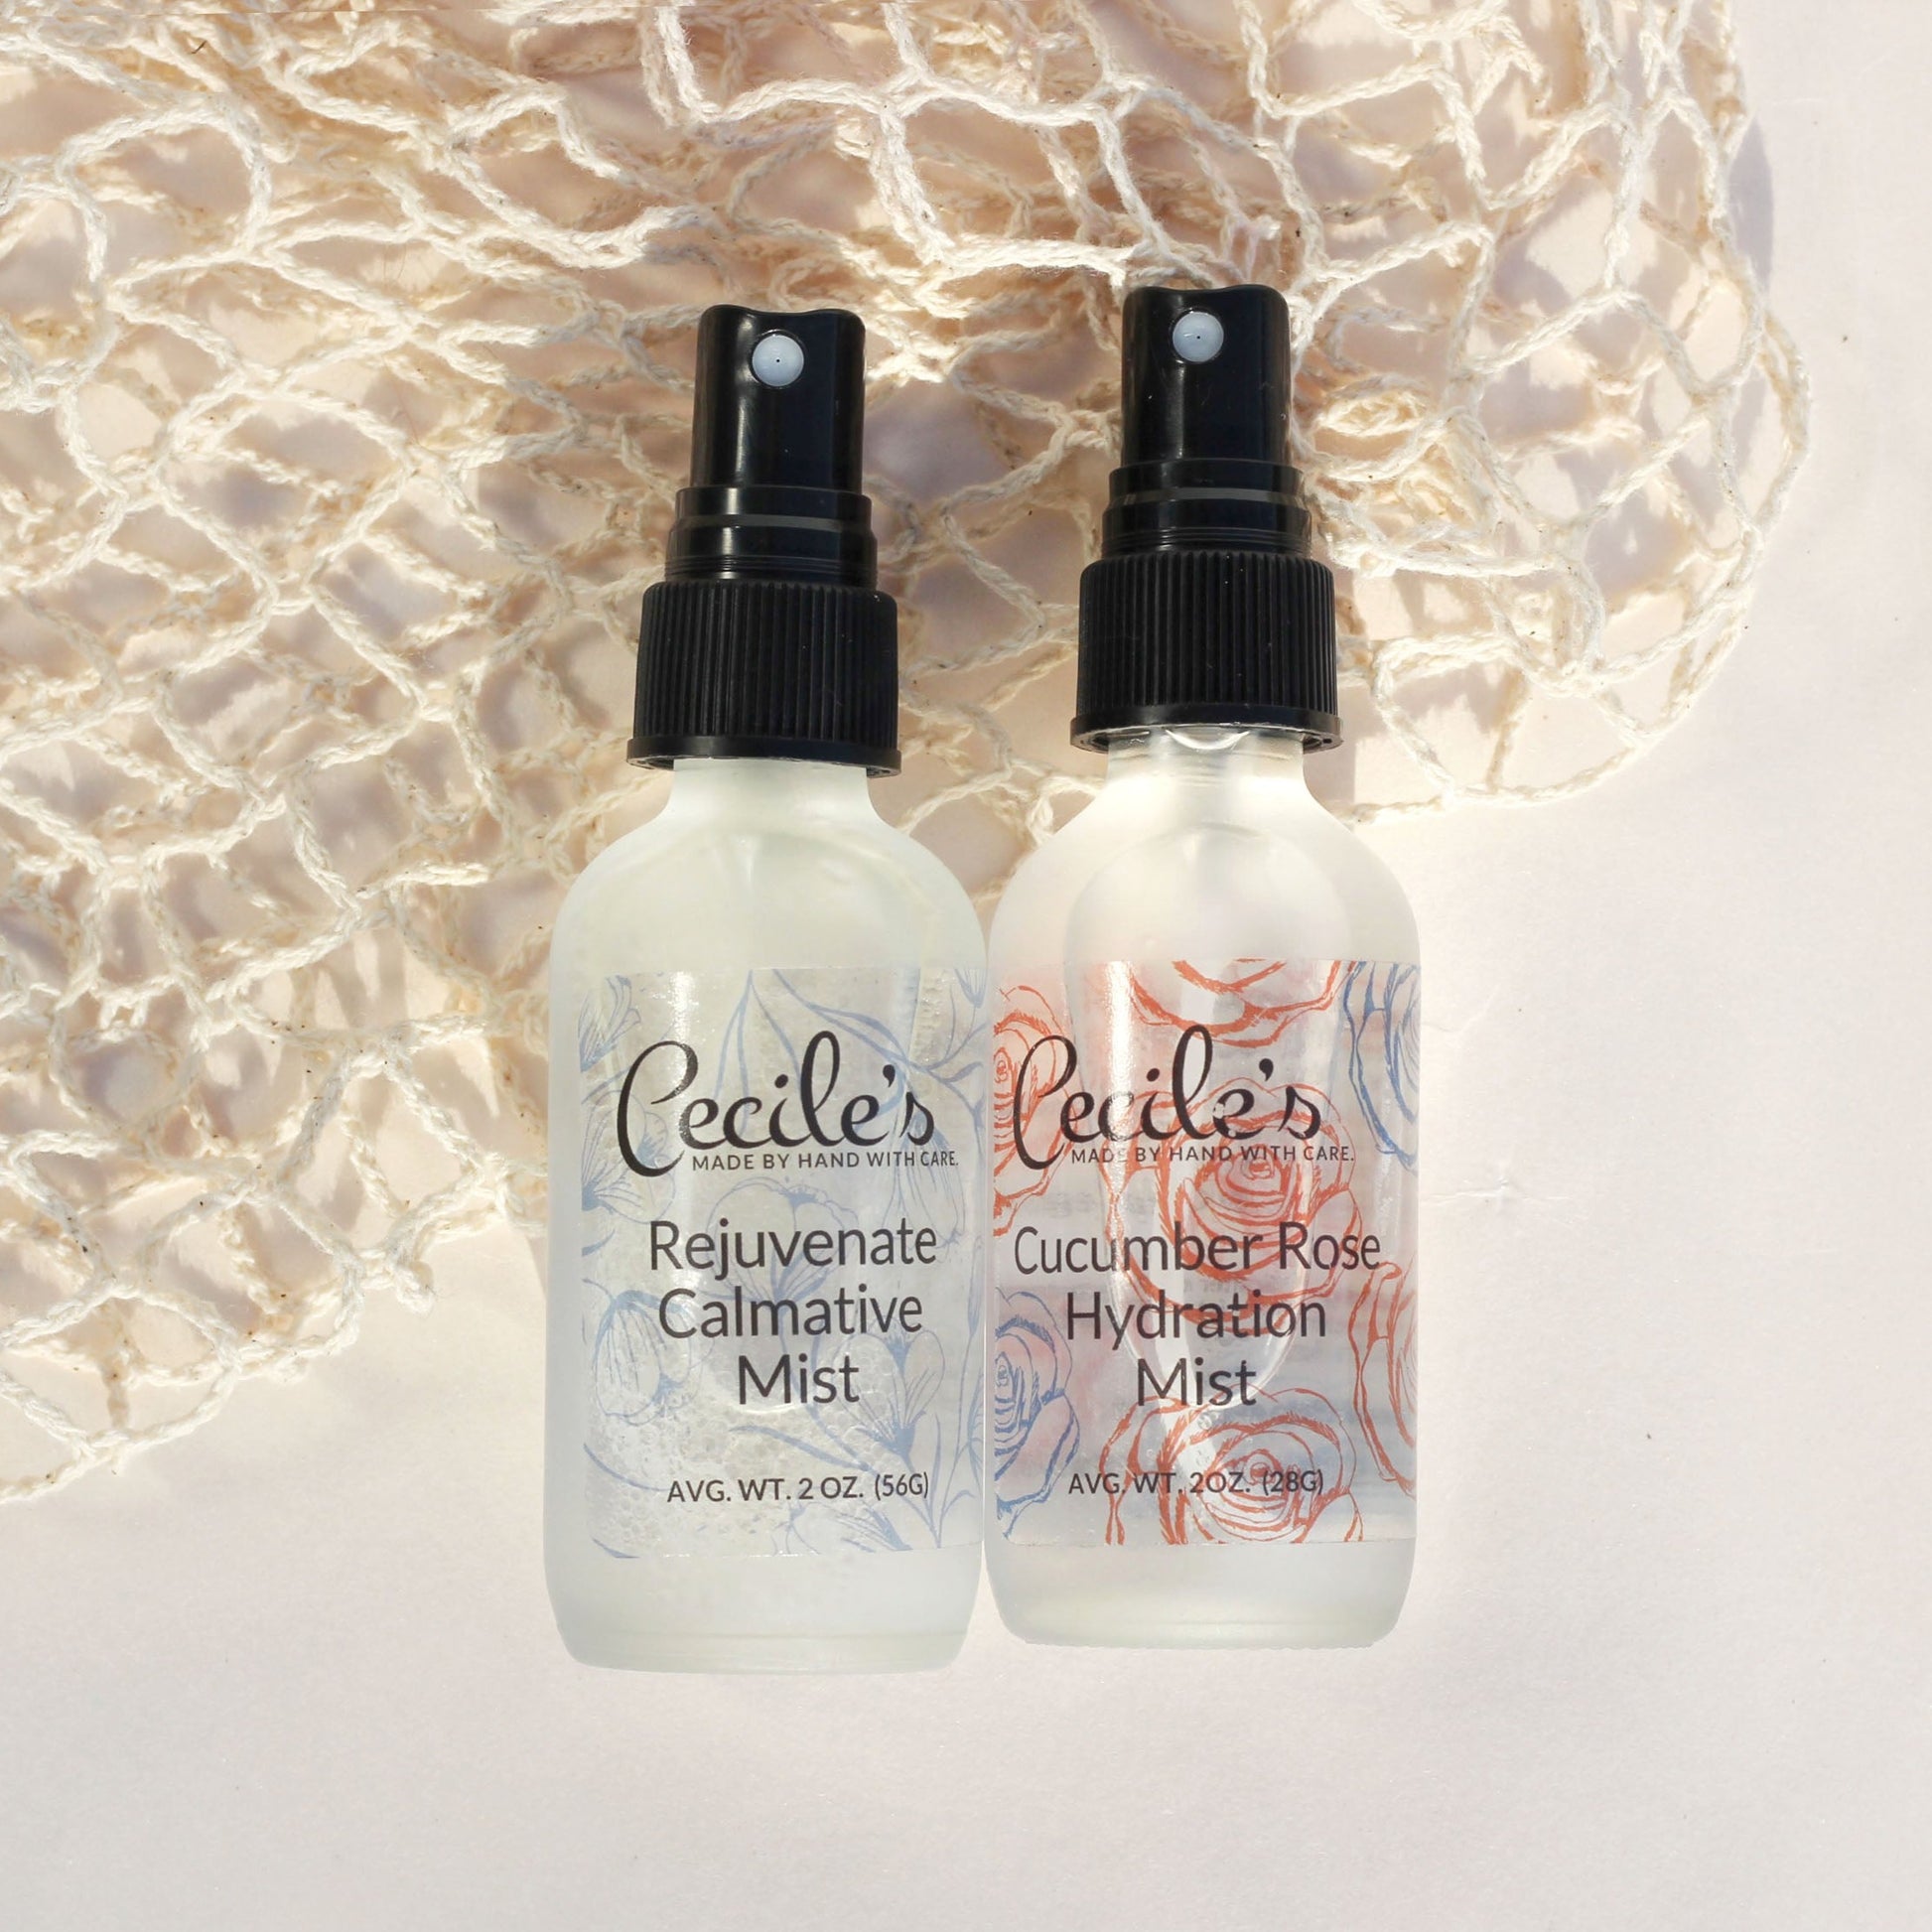 Cecile's Rejuvenate Calmative Mist aromatherapy, and Cucumber Rose Hydration Mist toner and facial refresher mist hydration